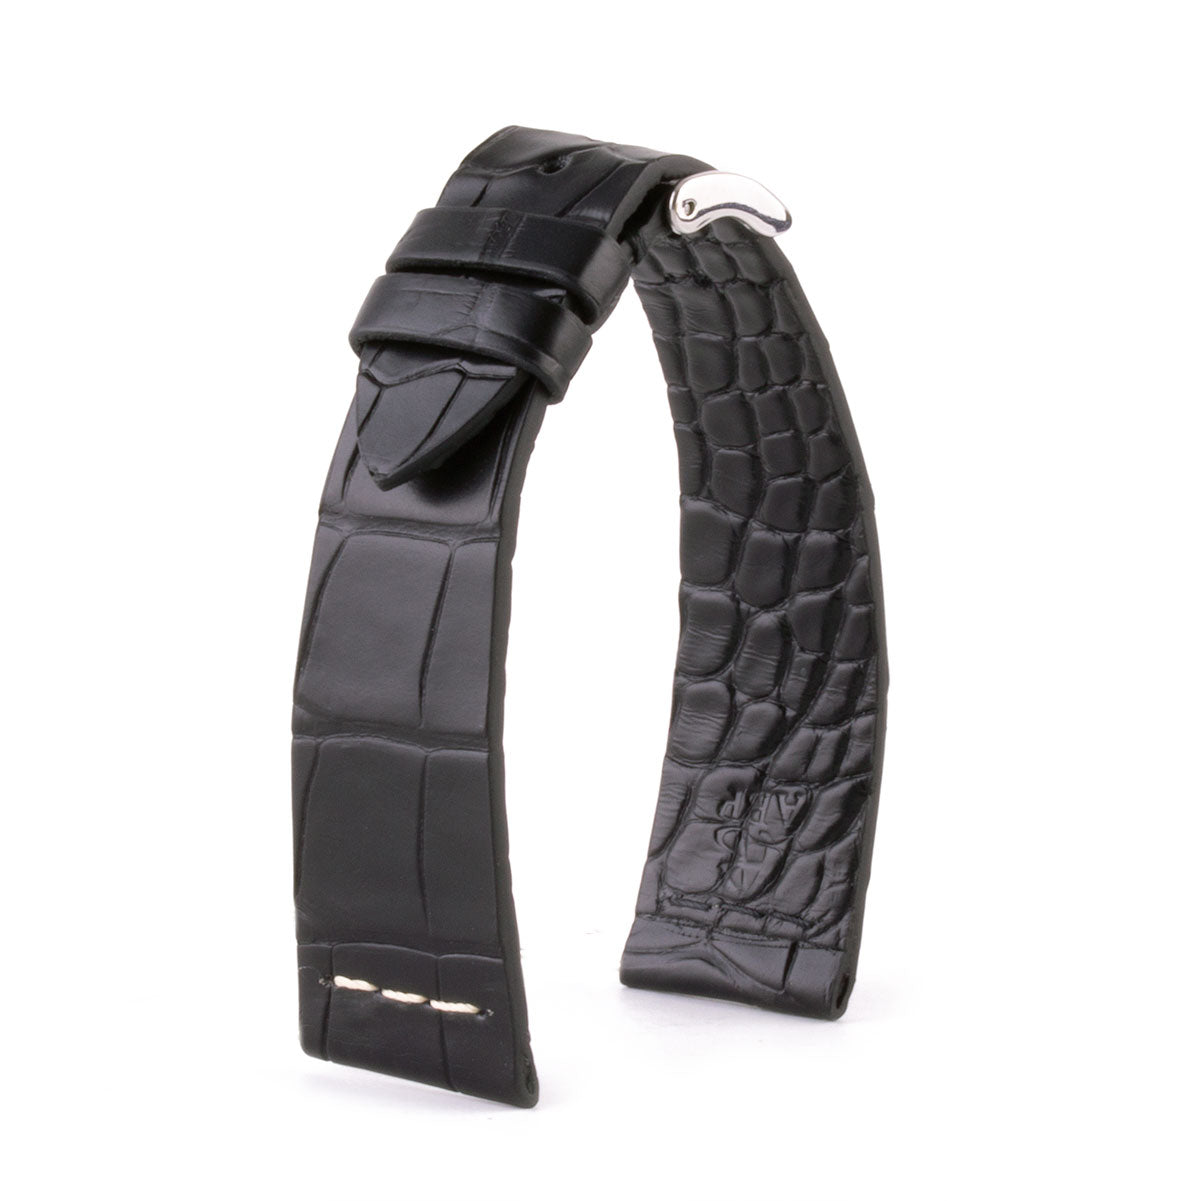 Leather watch strap - Sustainable alligator with contrasted stitching (black, blue, green, red...)